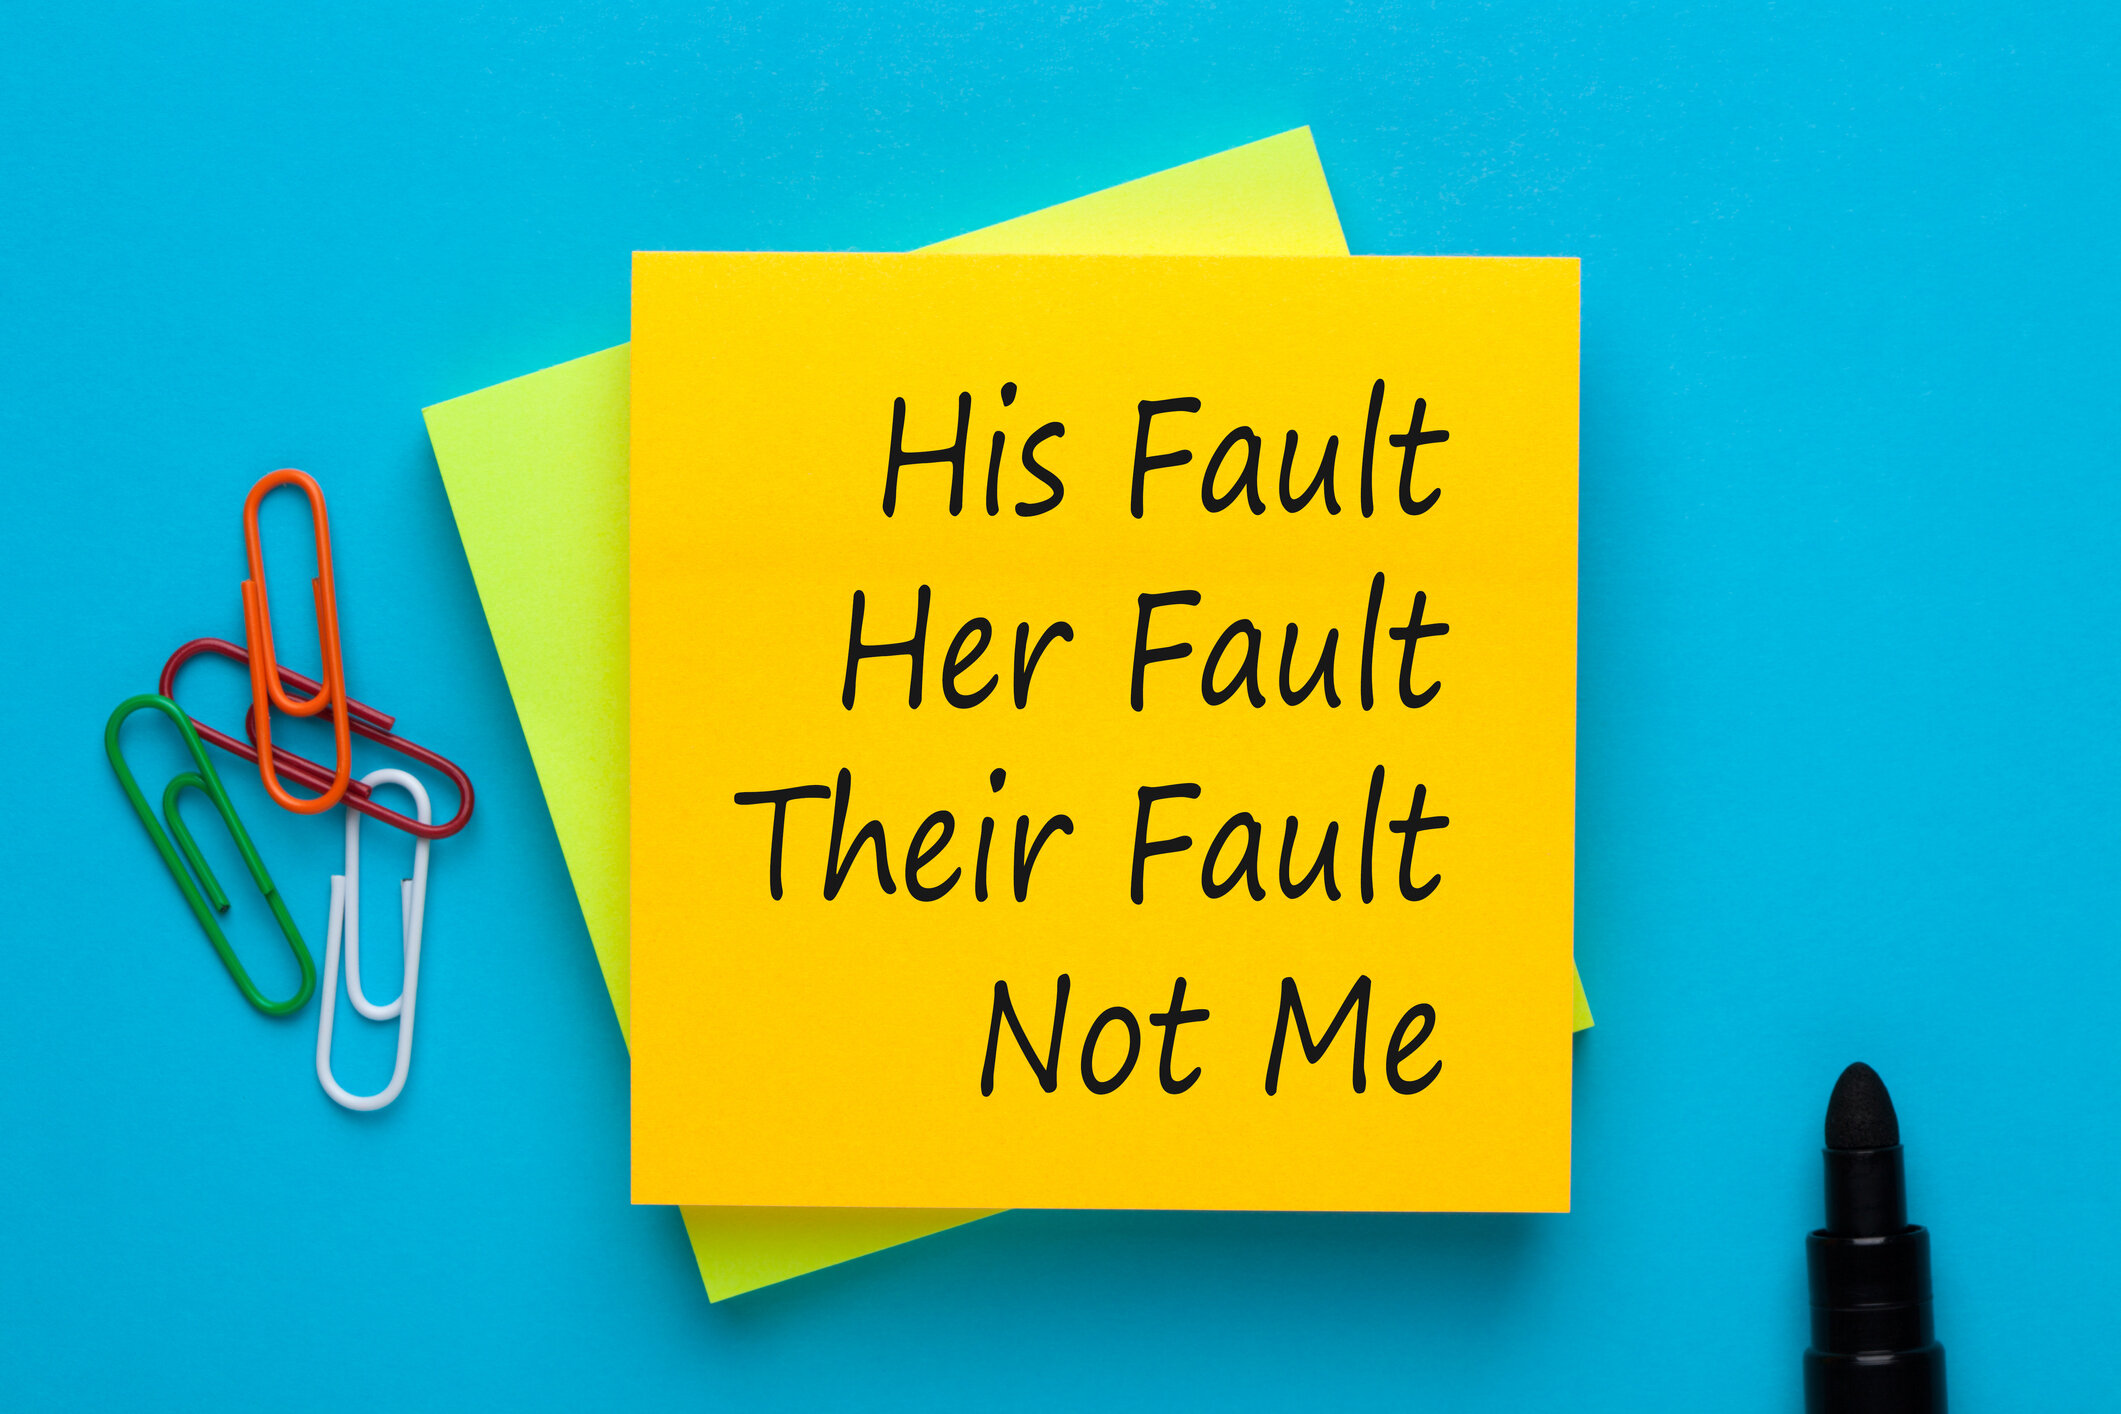 A post-it note that says his fault, her fault, their fault, not me